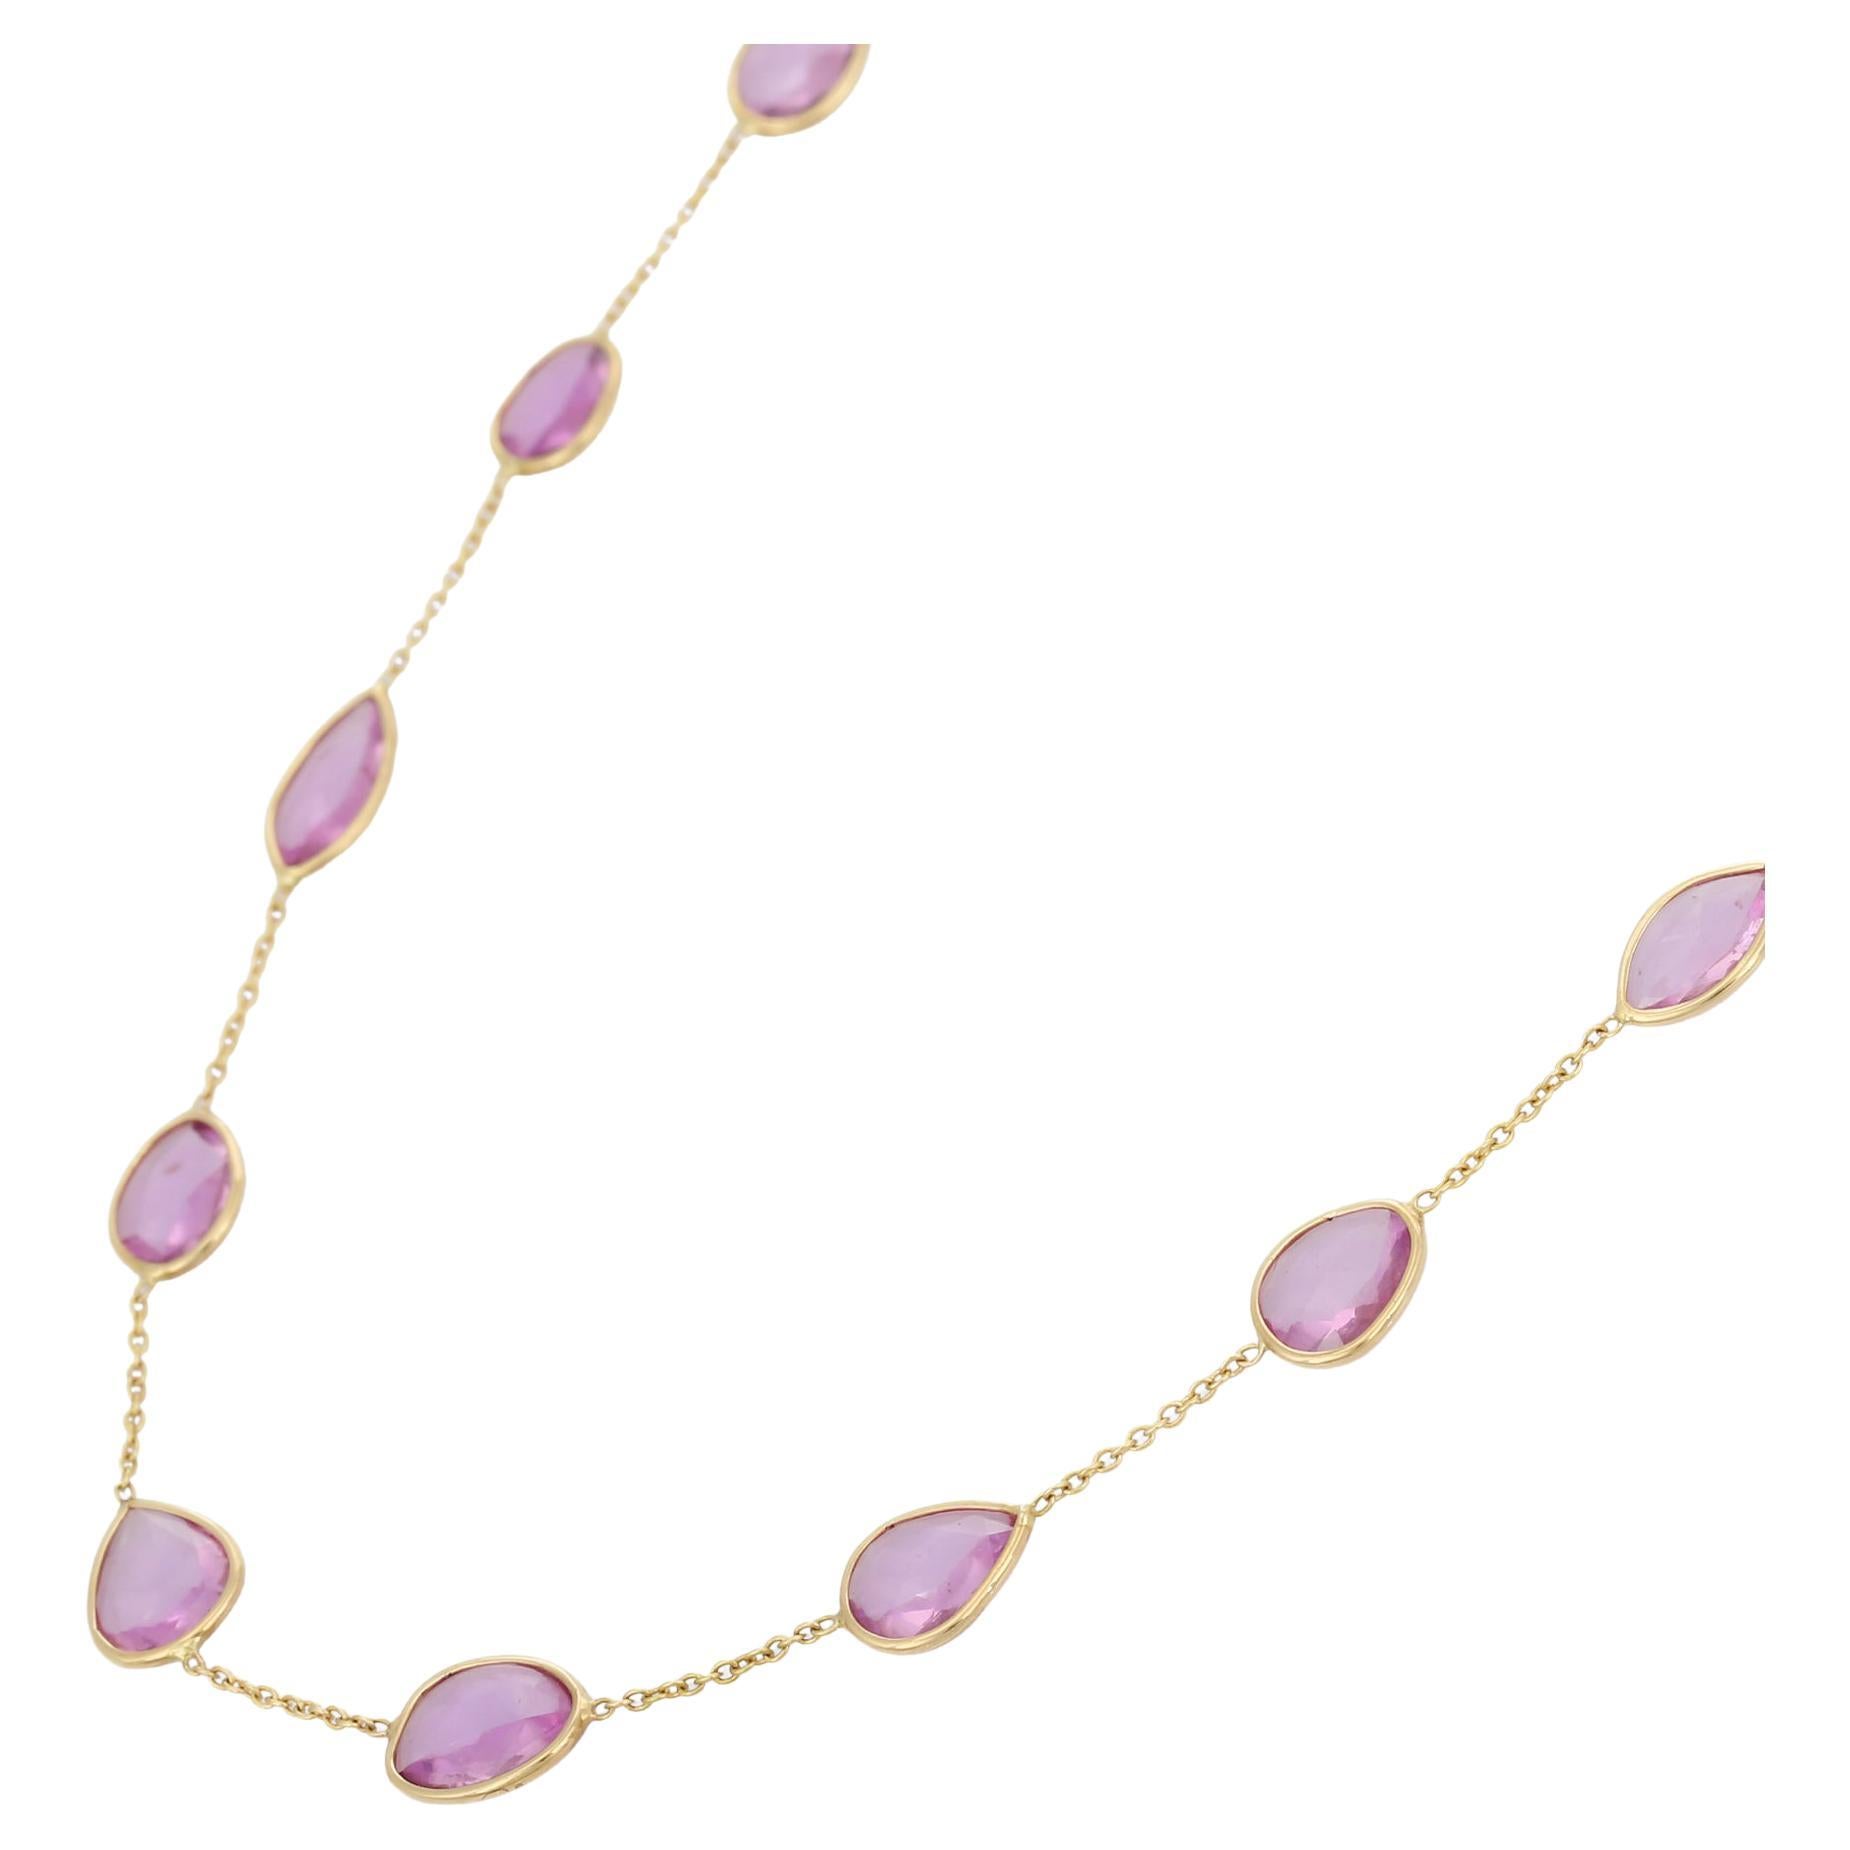 10.7 Carat Pink Sapphire Chain Necklace in 18K Yellow Gold